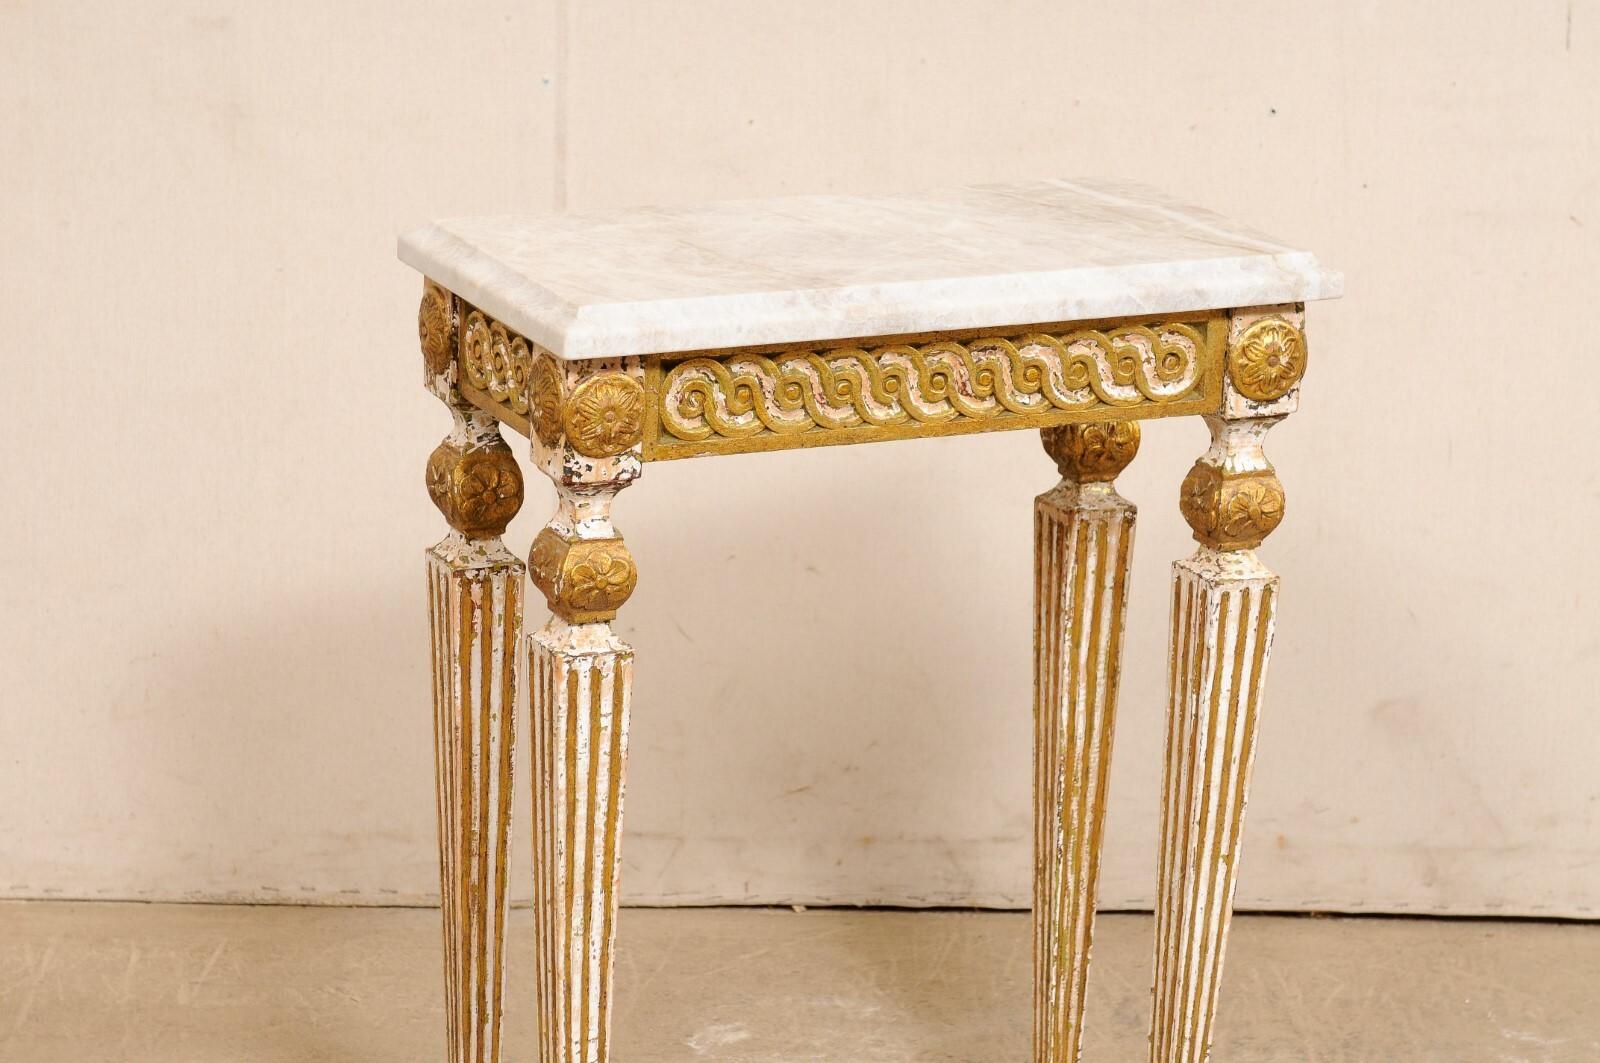 Marble A Petite Italian Antique Console w/Quartzite Top, Carved Apron & Fluted Legs For Sale